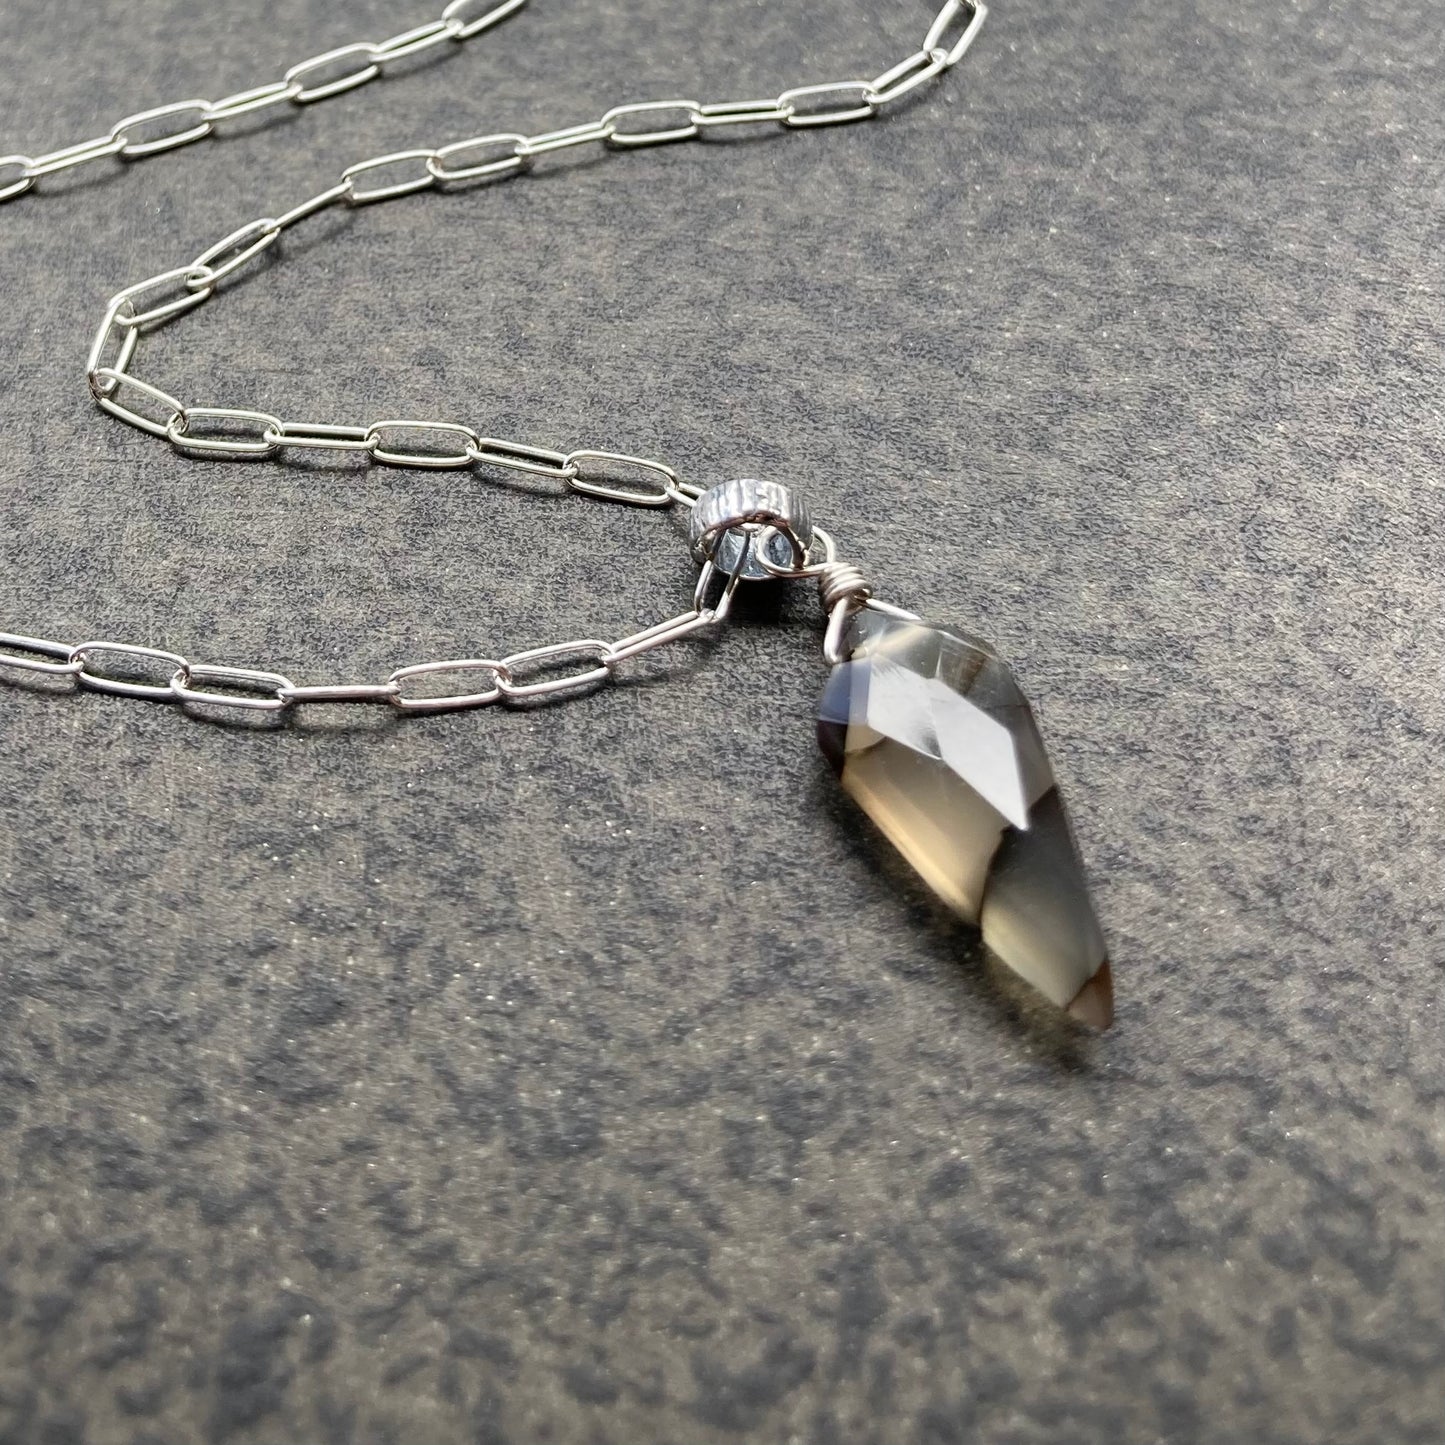 Montana Agate & Sterling Silver Pendant Necklace 16”